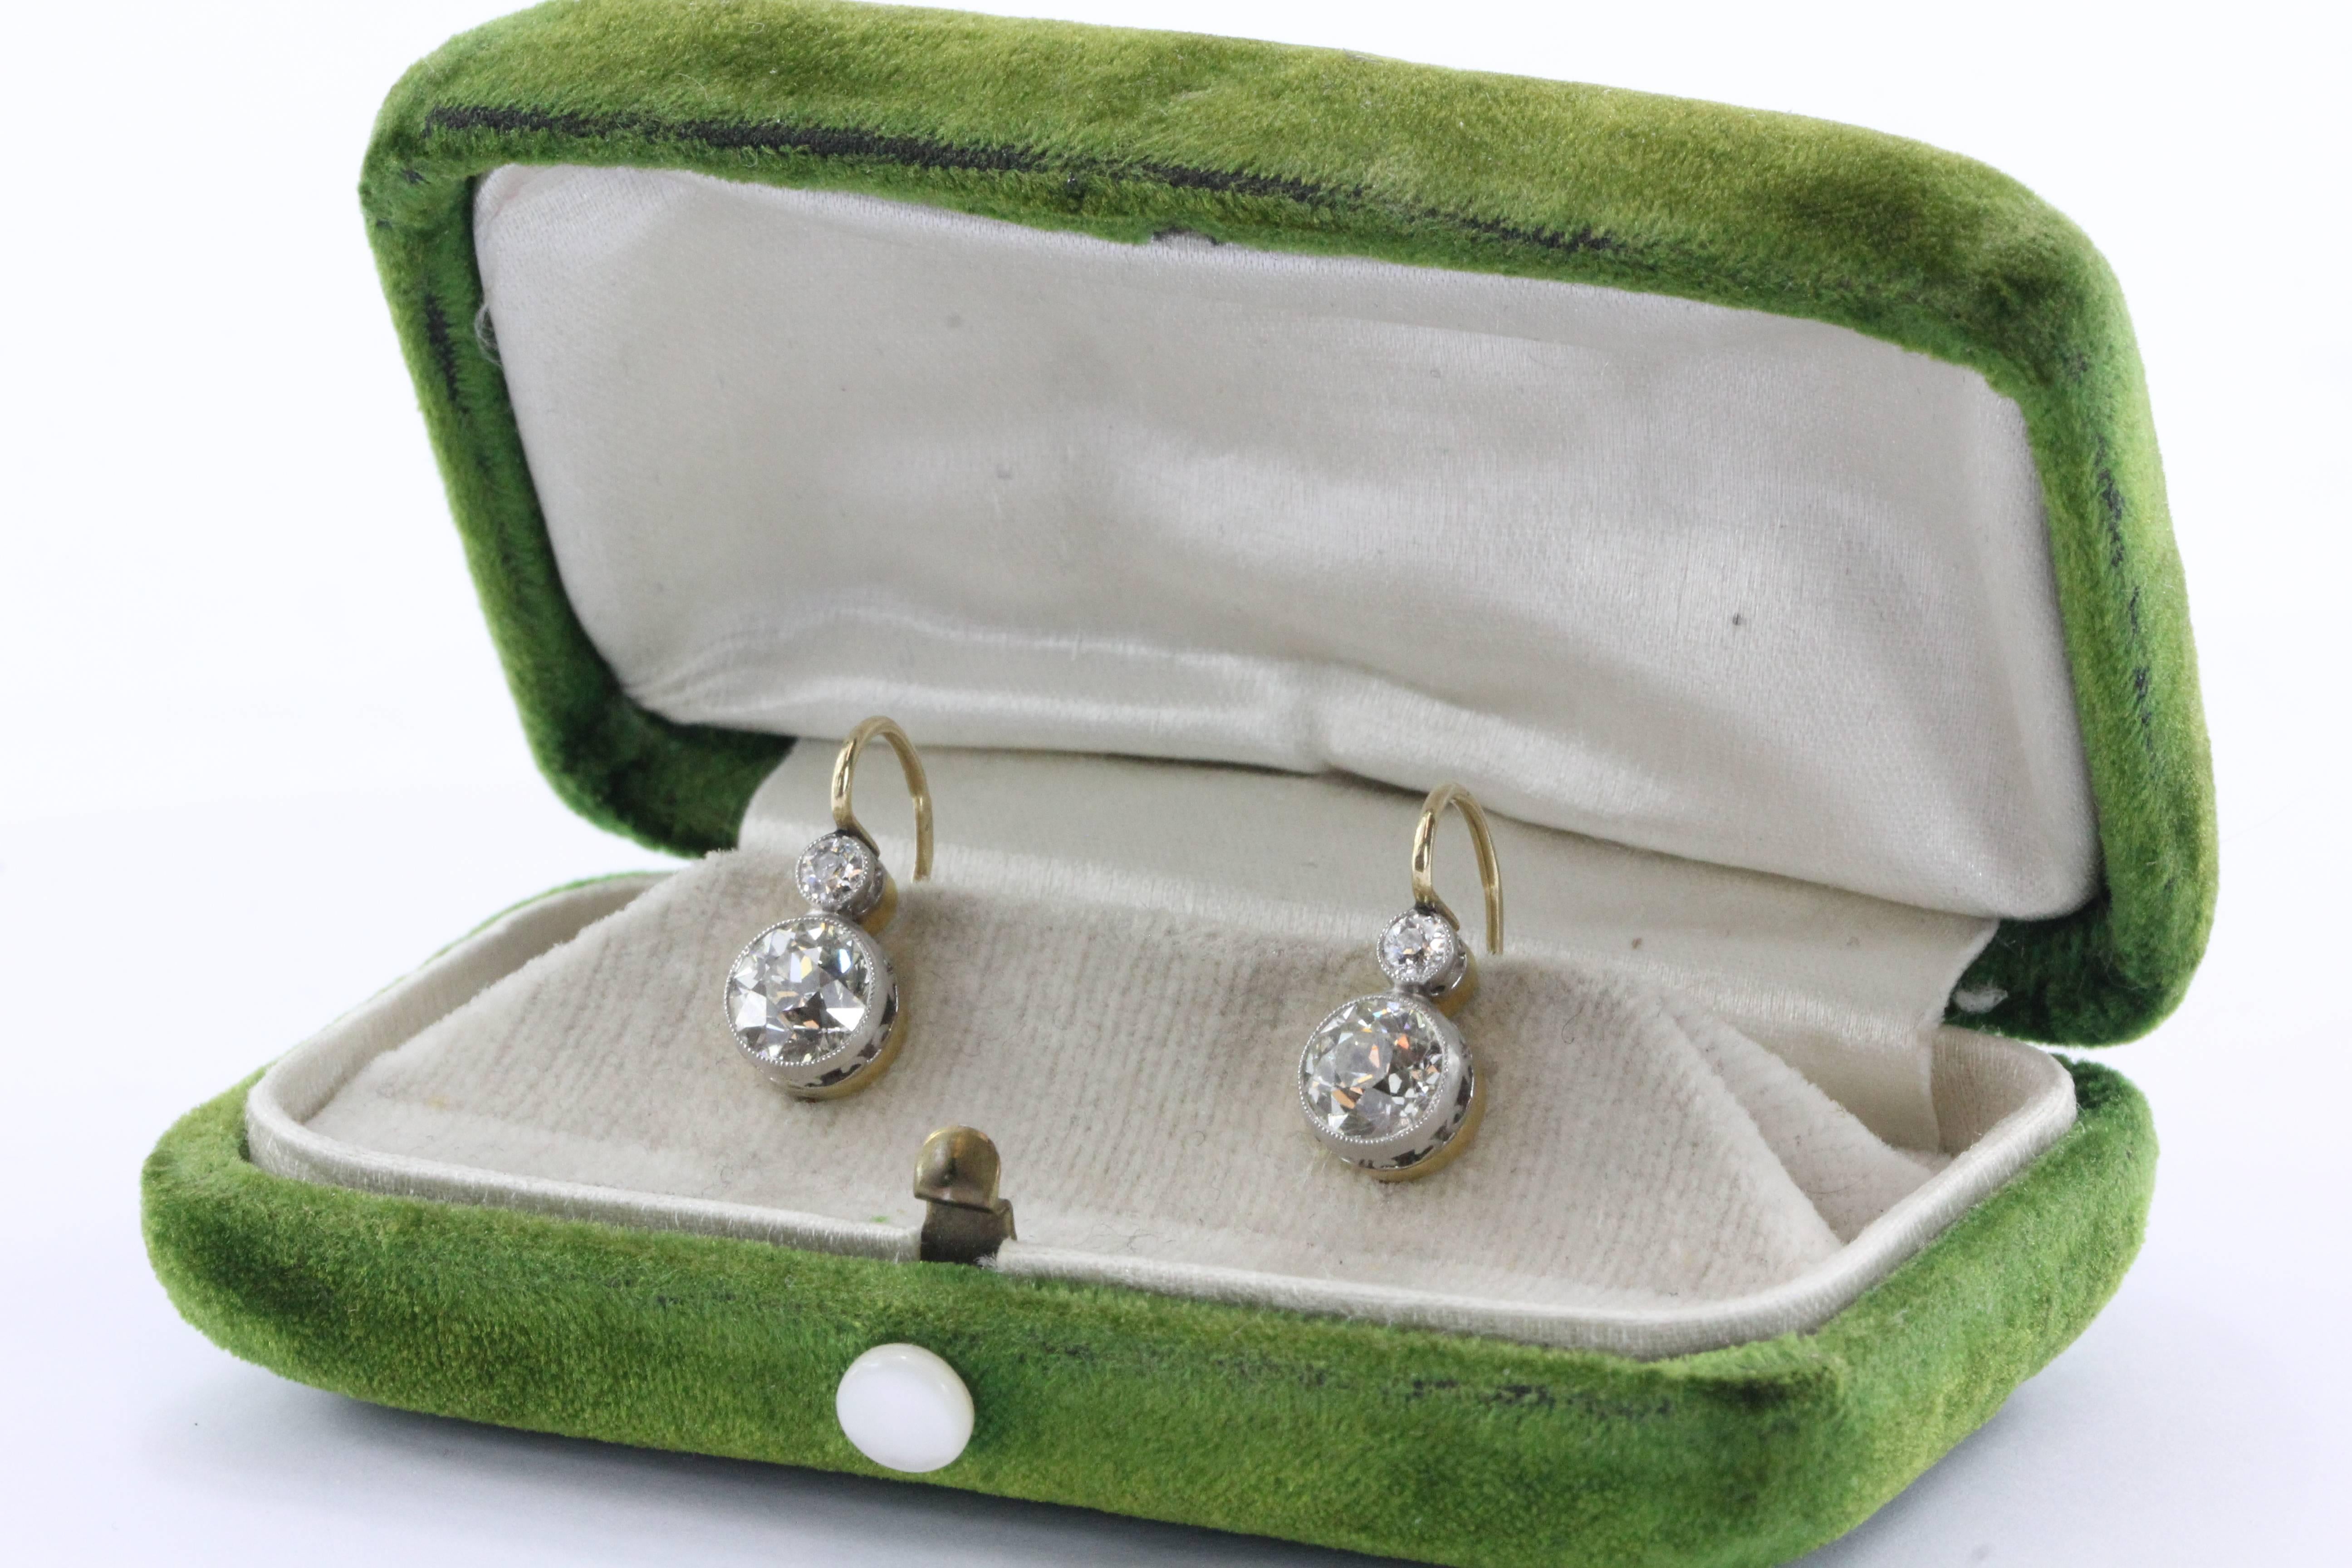 Edwardian 18K Gold with platinum top baskets 2.5 carat Old European cut diamond earrings. Hallmarked with the Russian hallmark used from 1908 - 1917 for items weighing under 8.5 grams. The mark was discontinued after the fall of the Czar. The